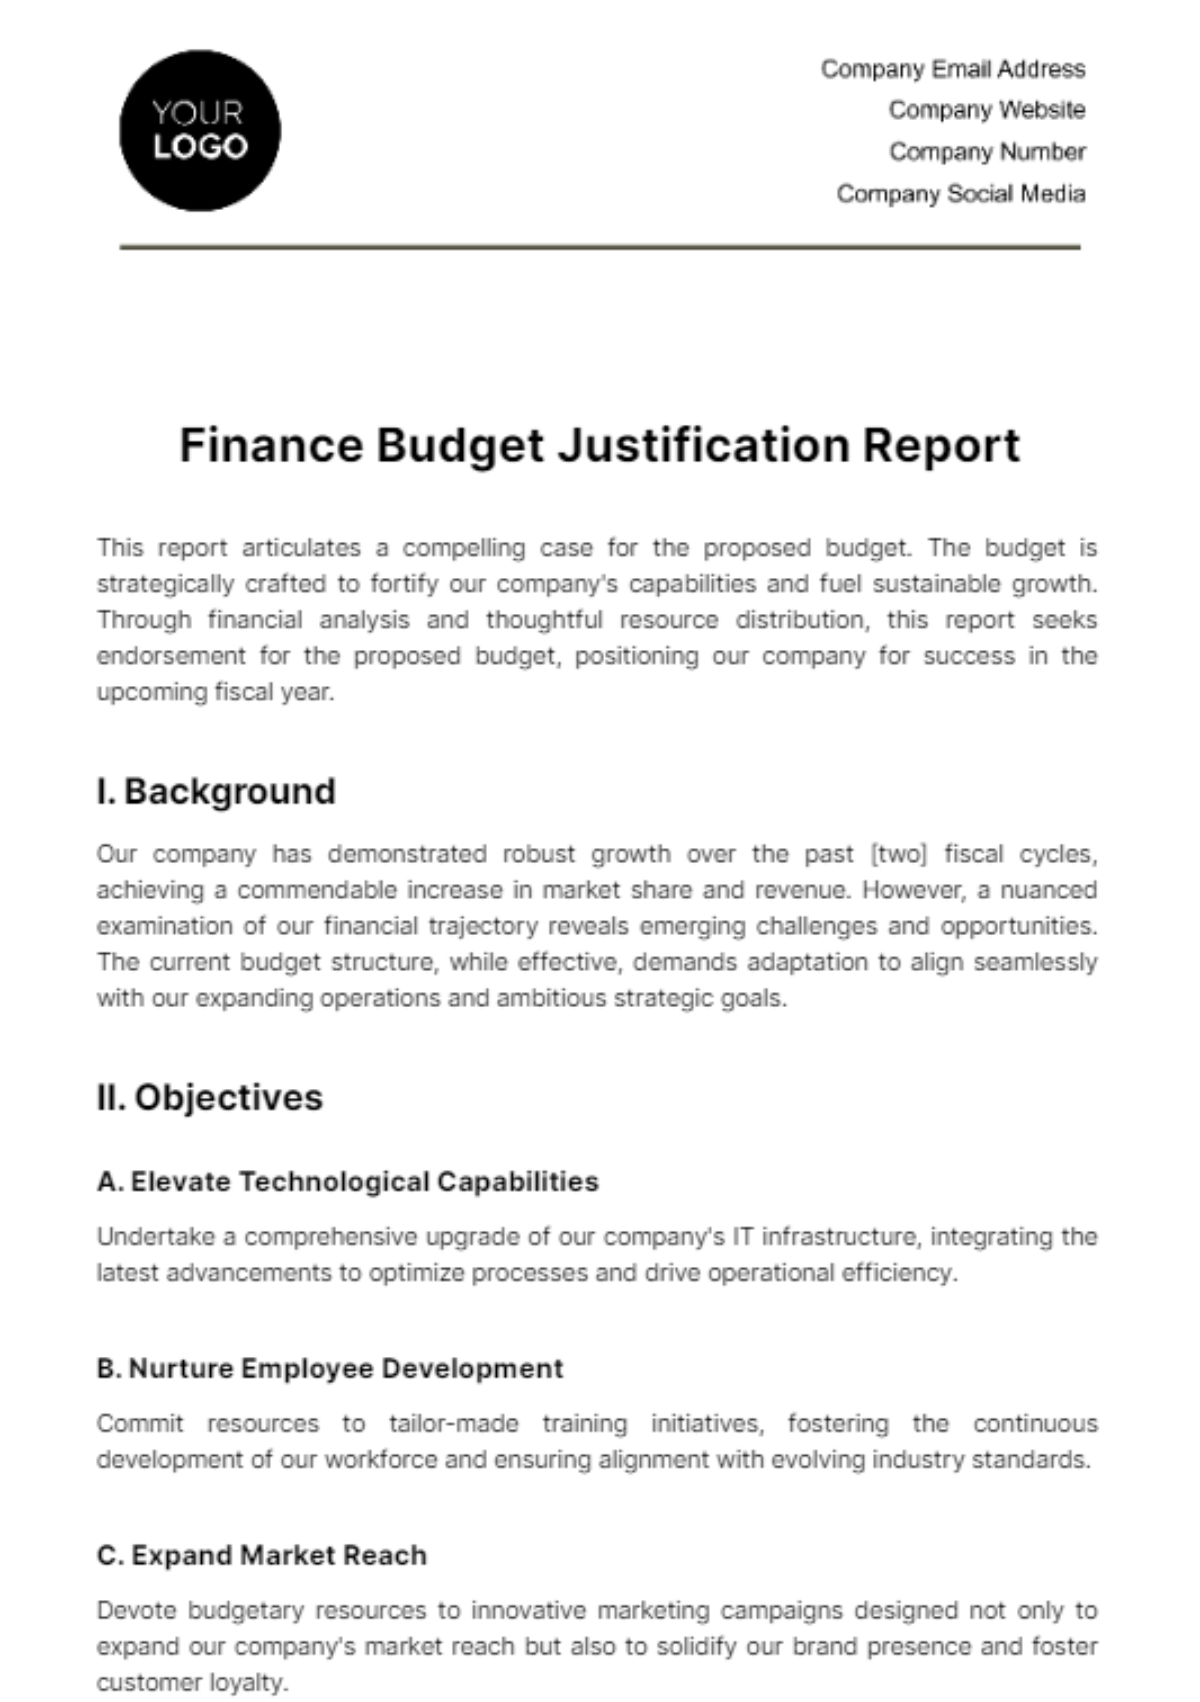 Free Finance Budget Justification Report Template